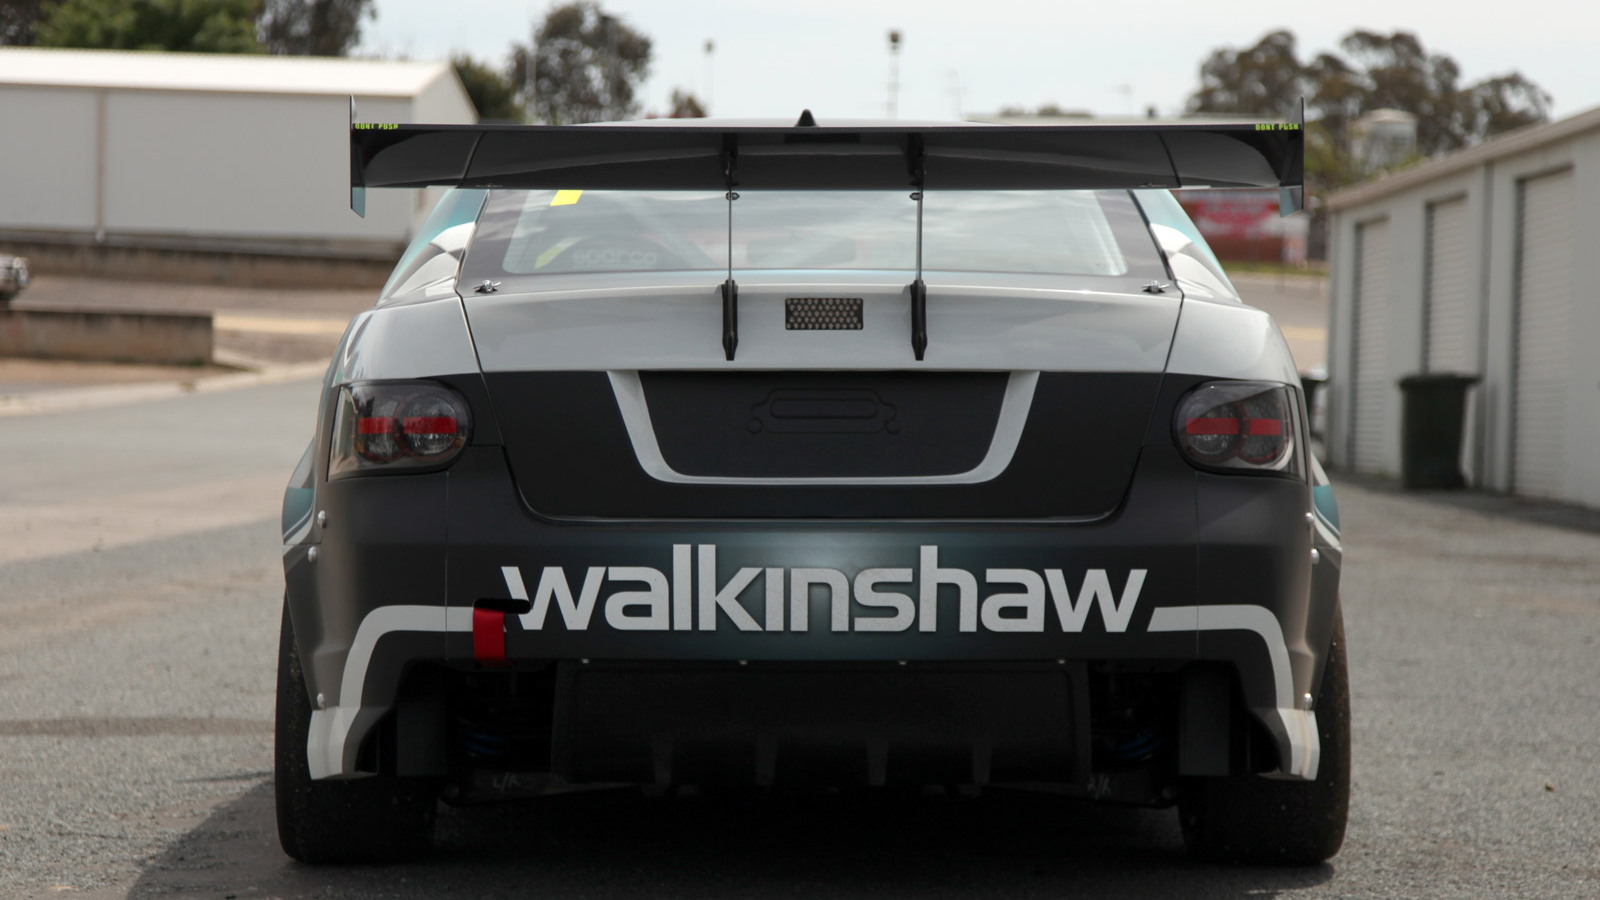 HSV ClubSport R8 race car based on the Holden Commodore